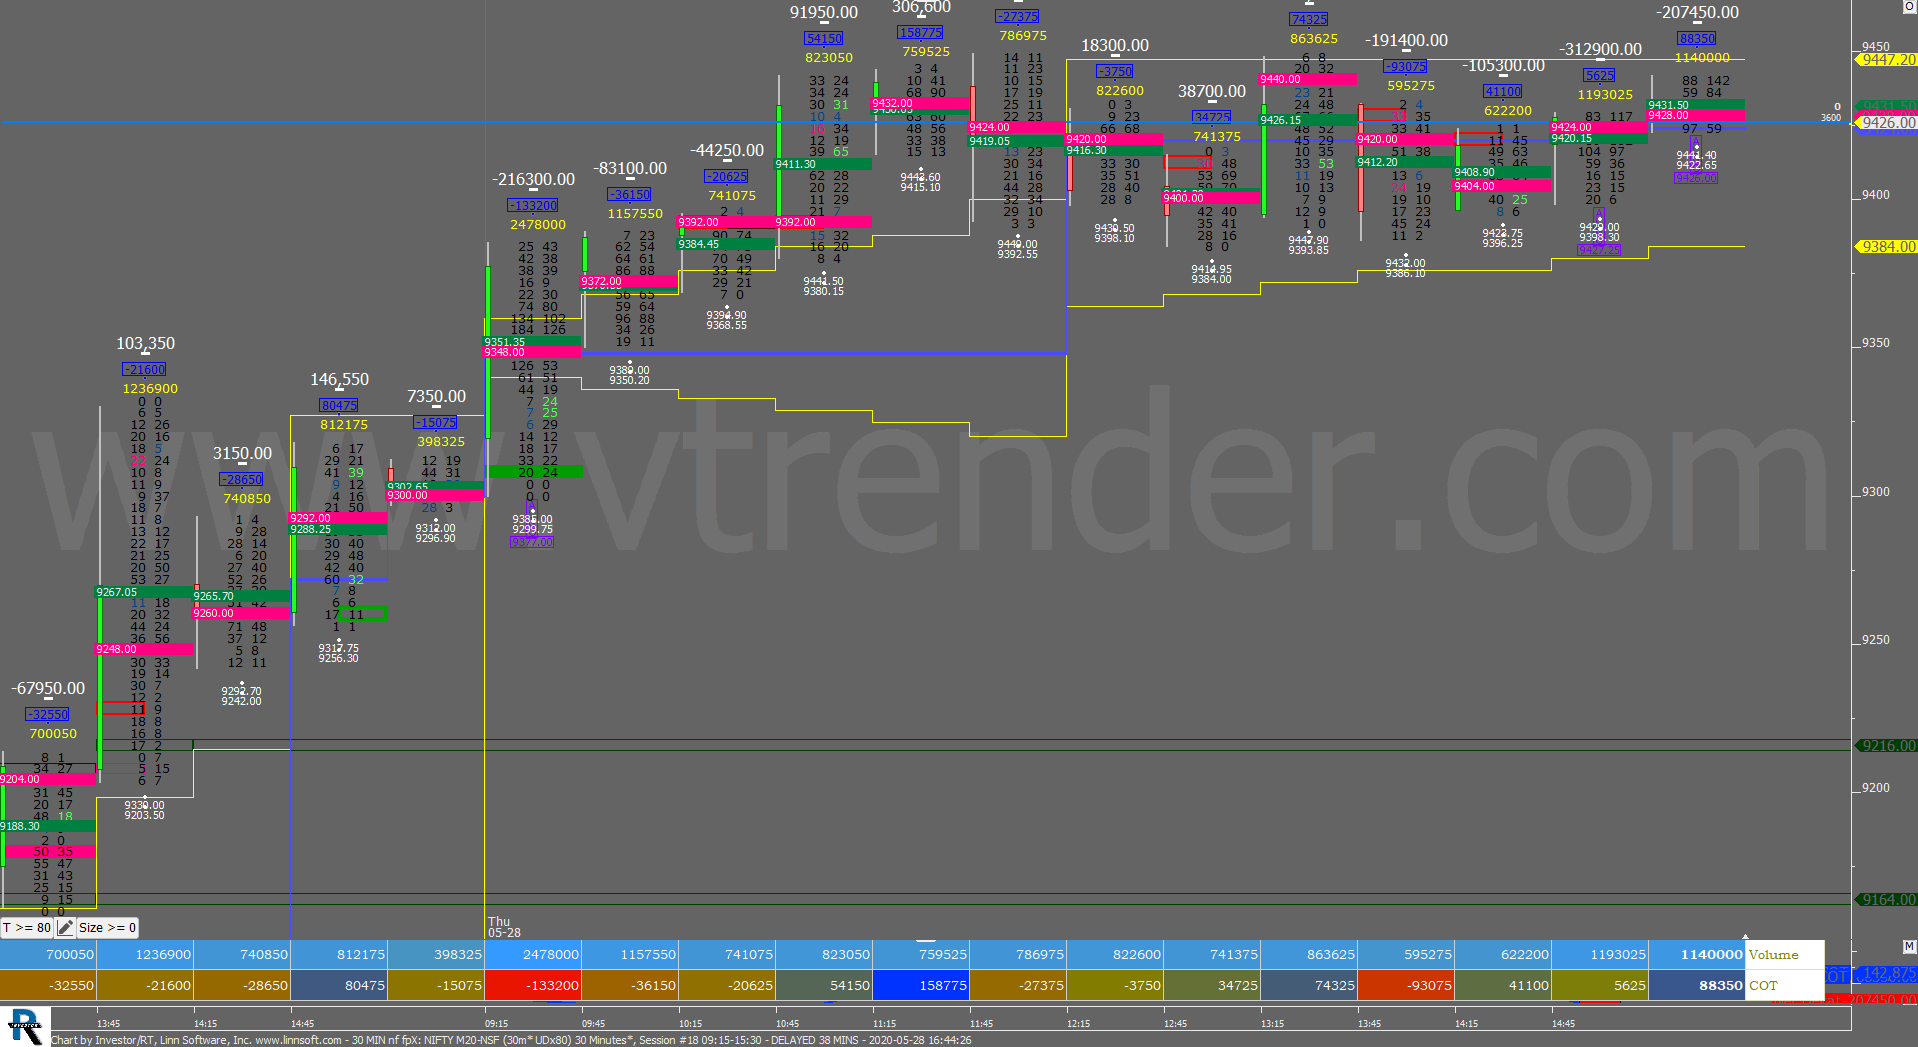 30 Min Nf Fpx 18 Order Flow Charts Dated 28Th May 2020 Banknifty Futures, Day Trading, Intraday Trading, Intraday Trading Strategies, Nifty Futures, Order Flow Analysis, Support And Resistance, Trading Strategies, Volume Profile Trading